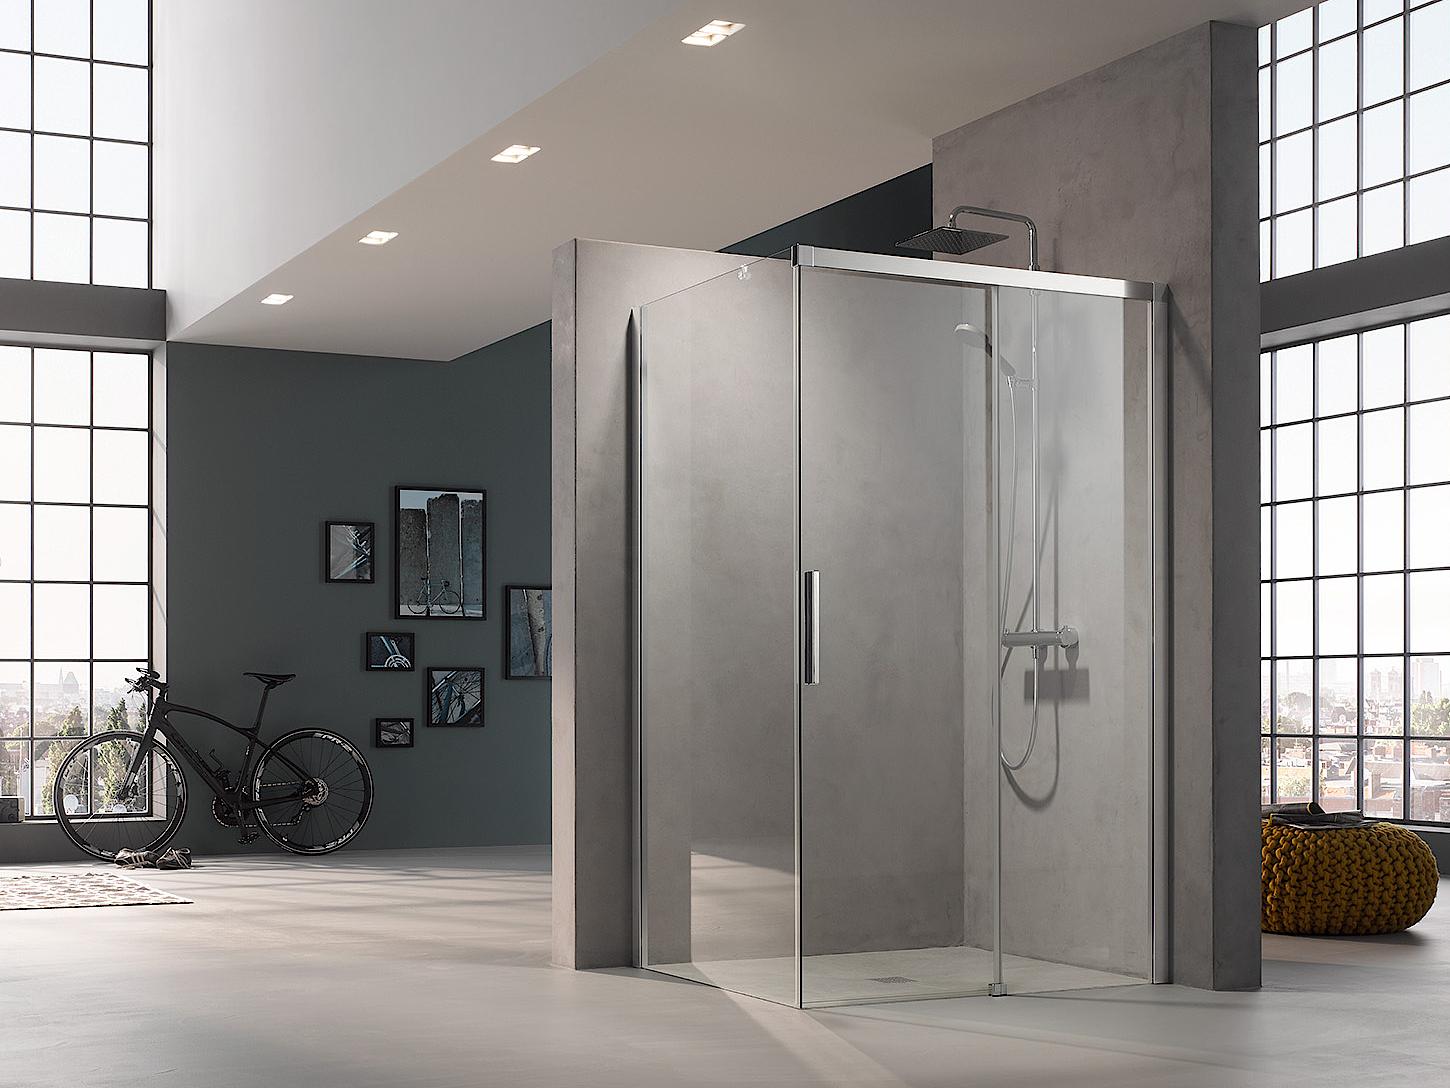 Kermi profile shower enclosure NICA off-floor two-part sliding door with fixed panel and wall profile